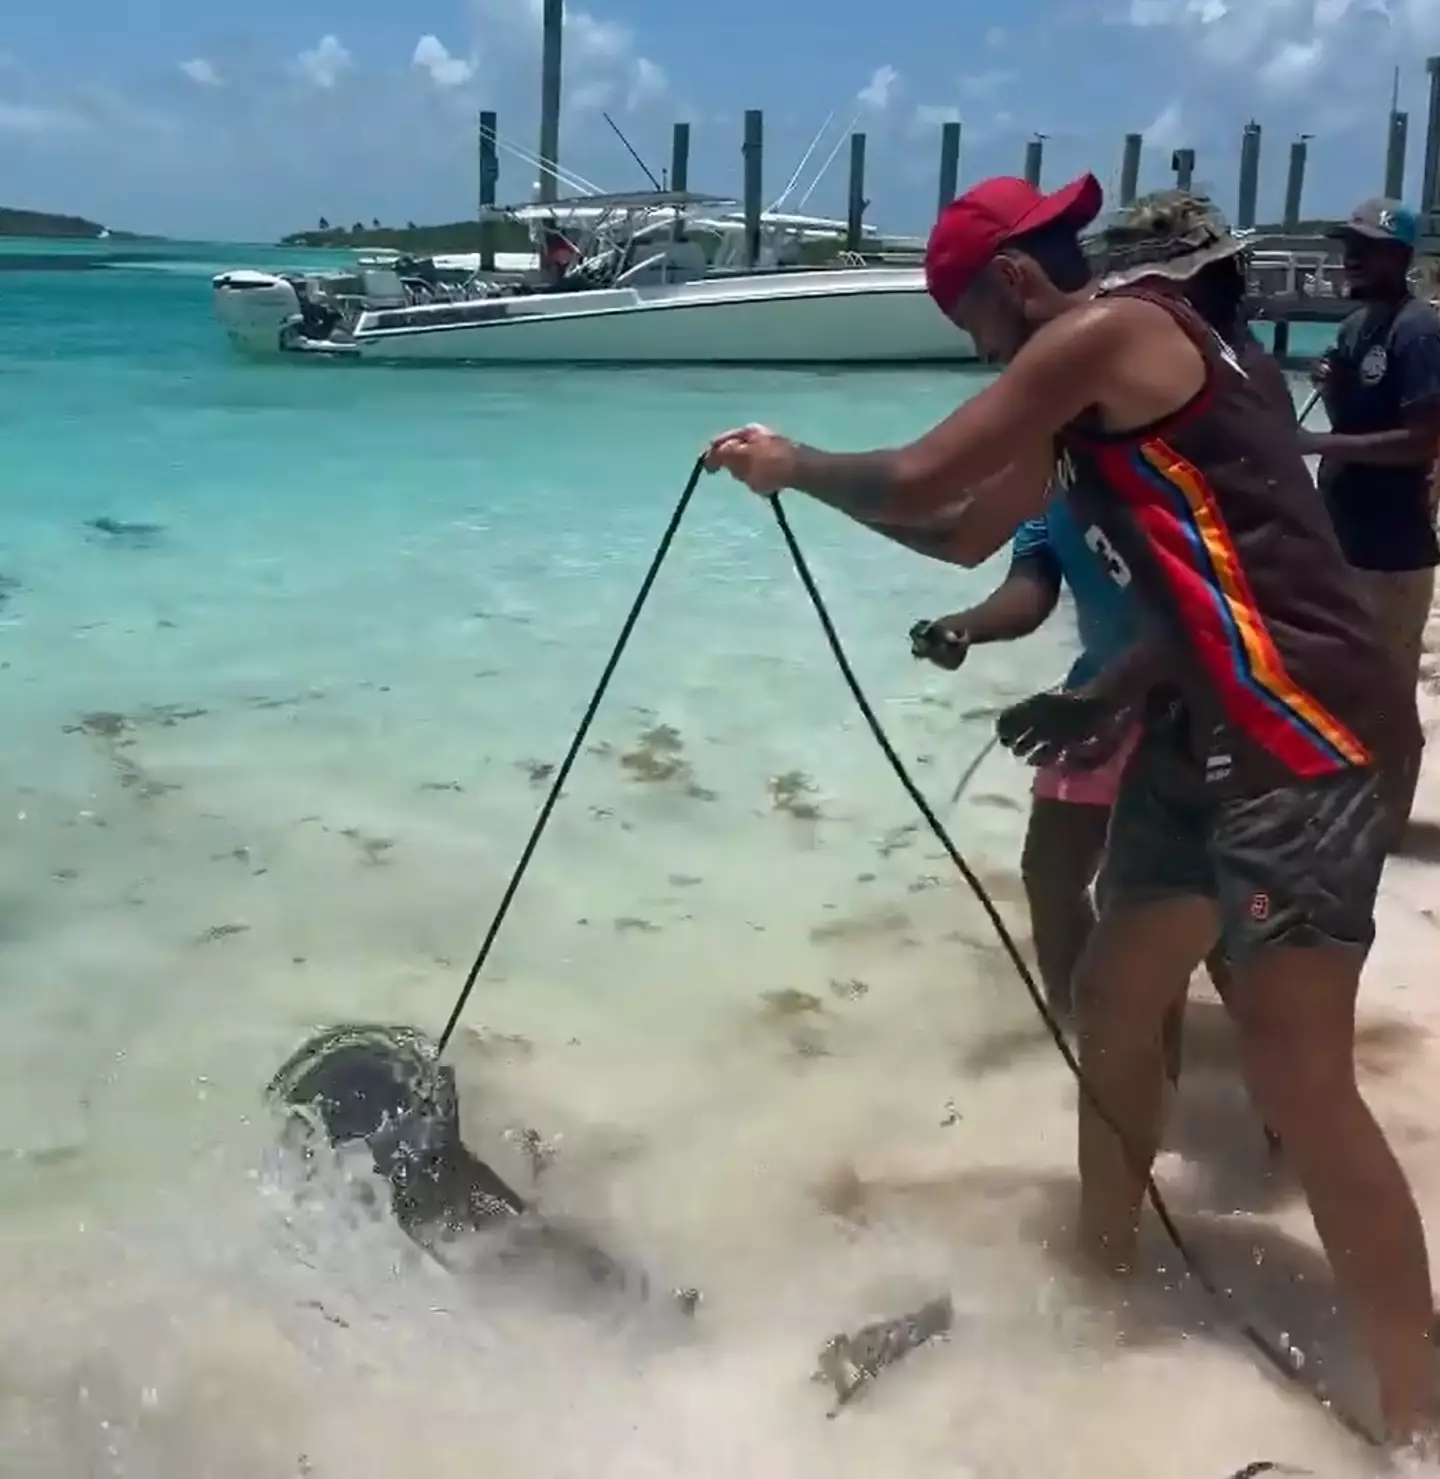 In the video Kyrgios pulls the shark towards the sea shore.